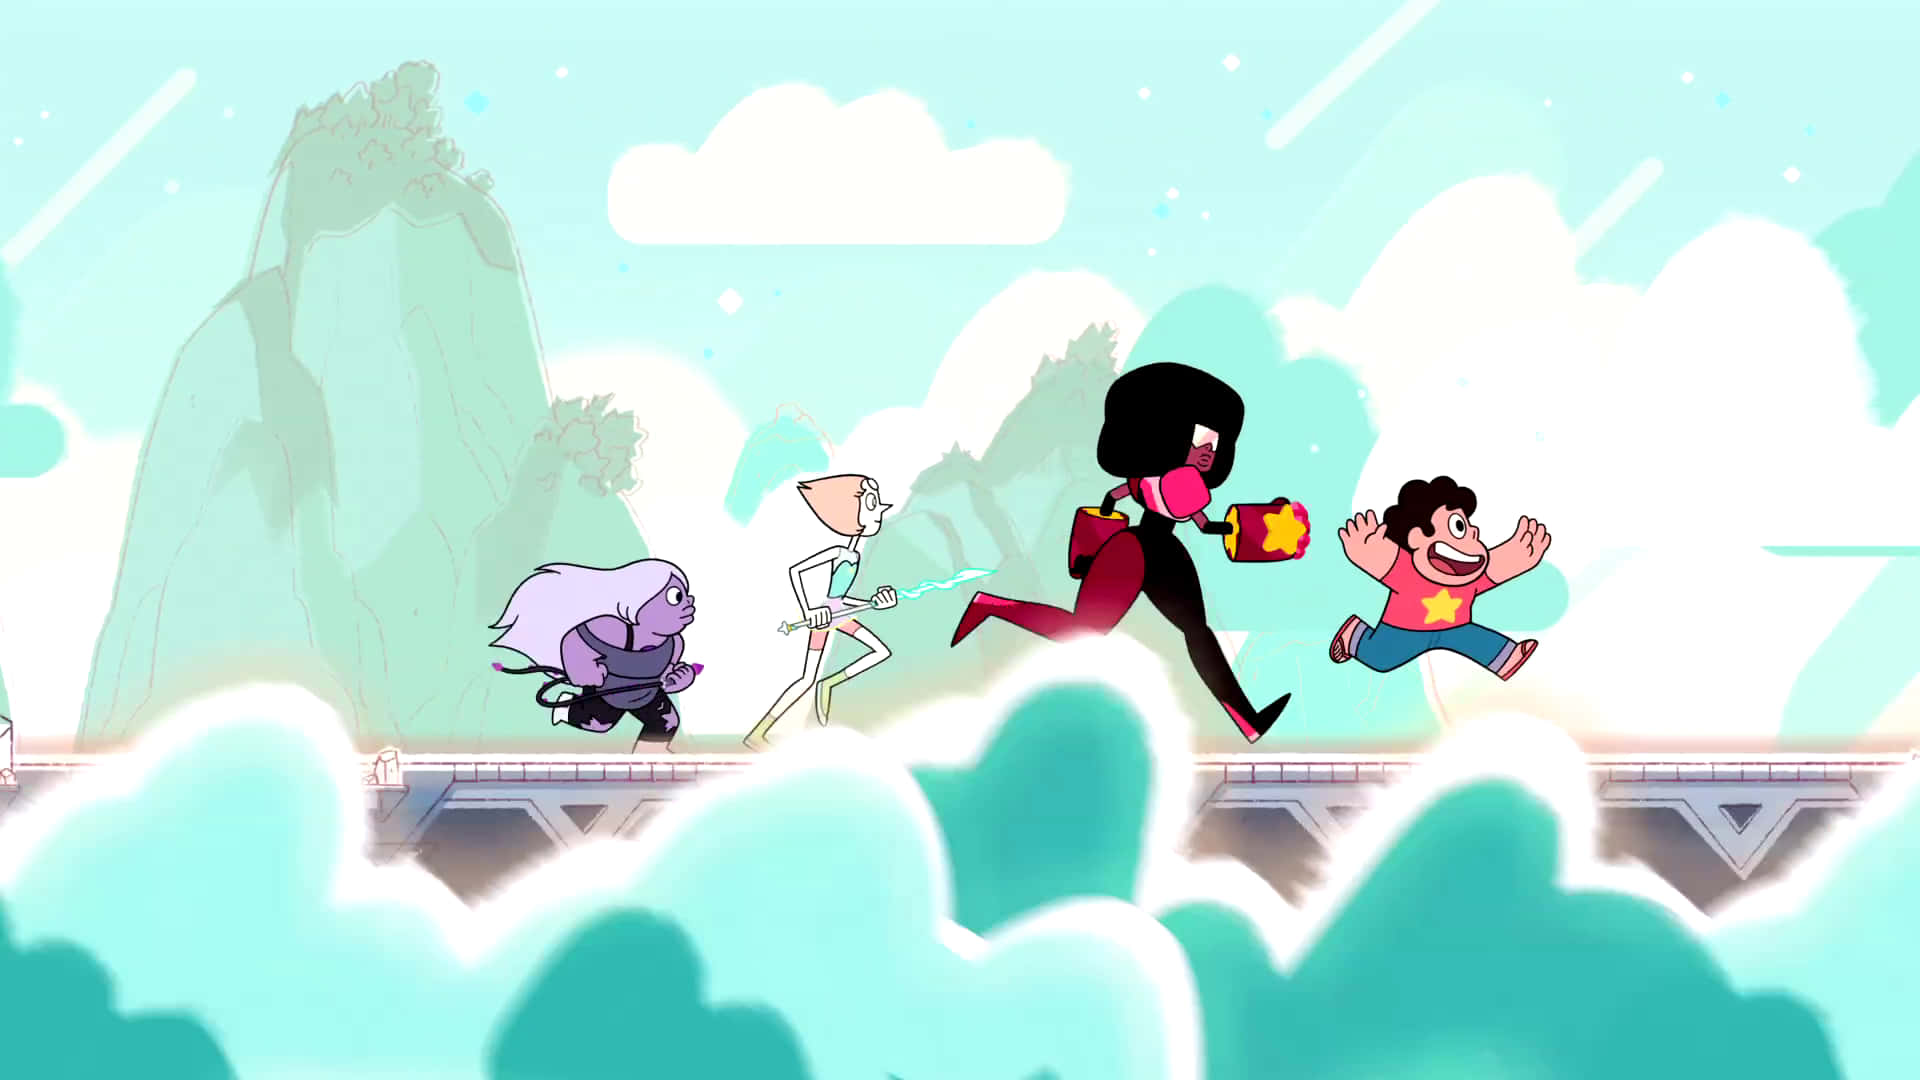 Steven Universe fan-favorite characters Pearl, Garnet, Amethyst and Steven come together for an iconic group shot! Wallpaper